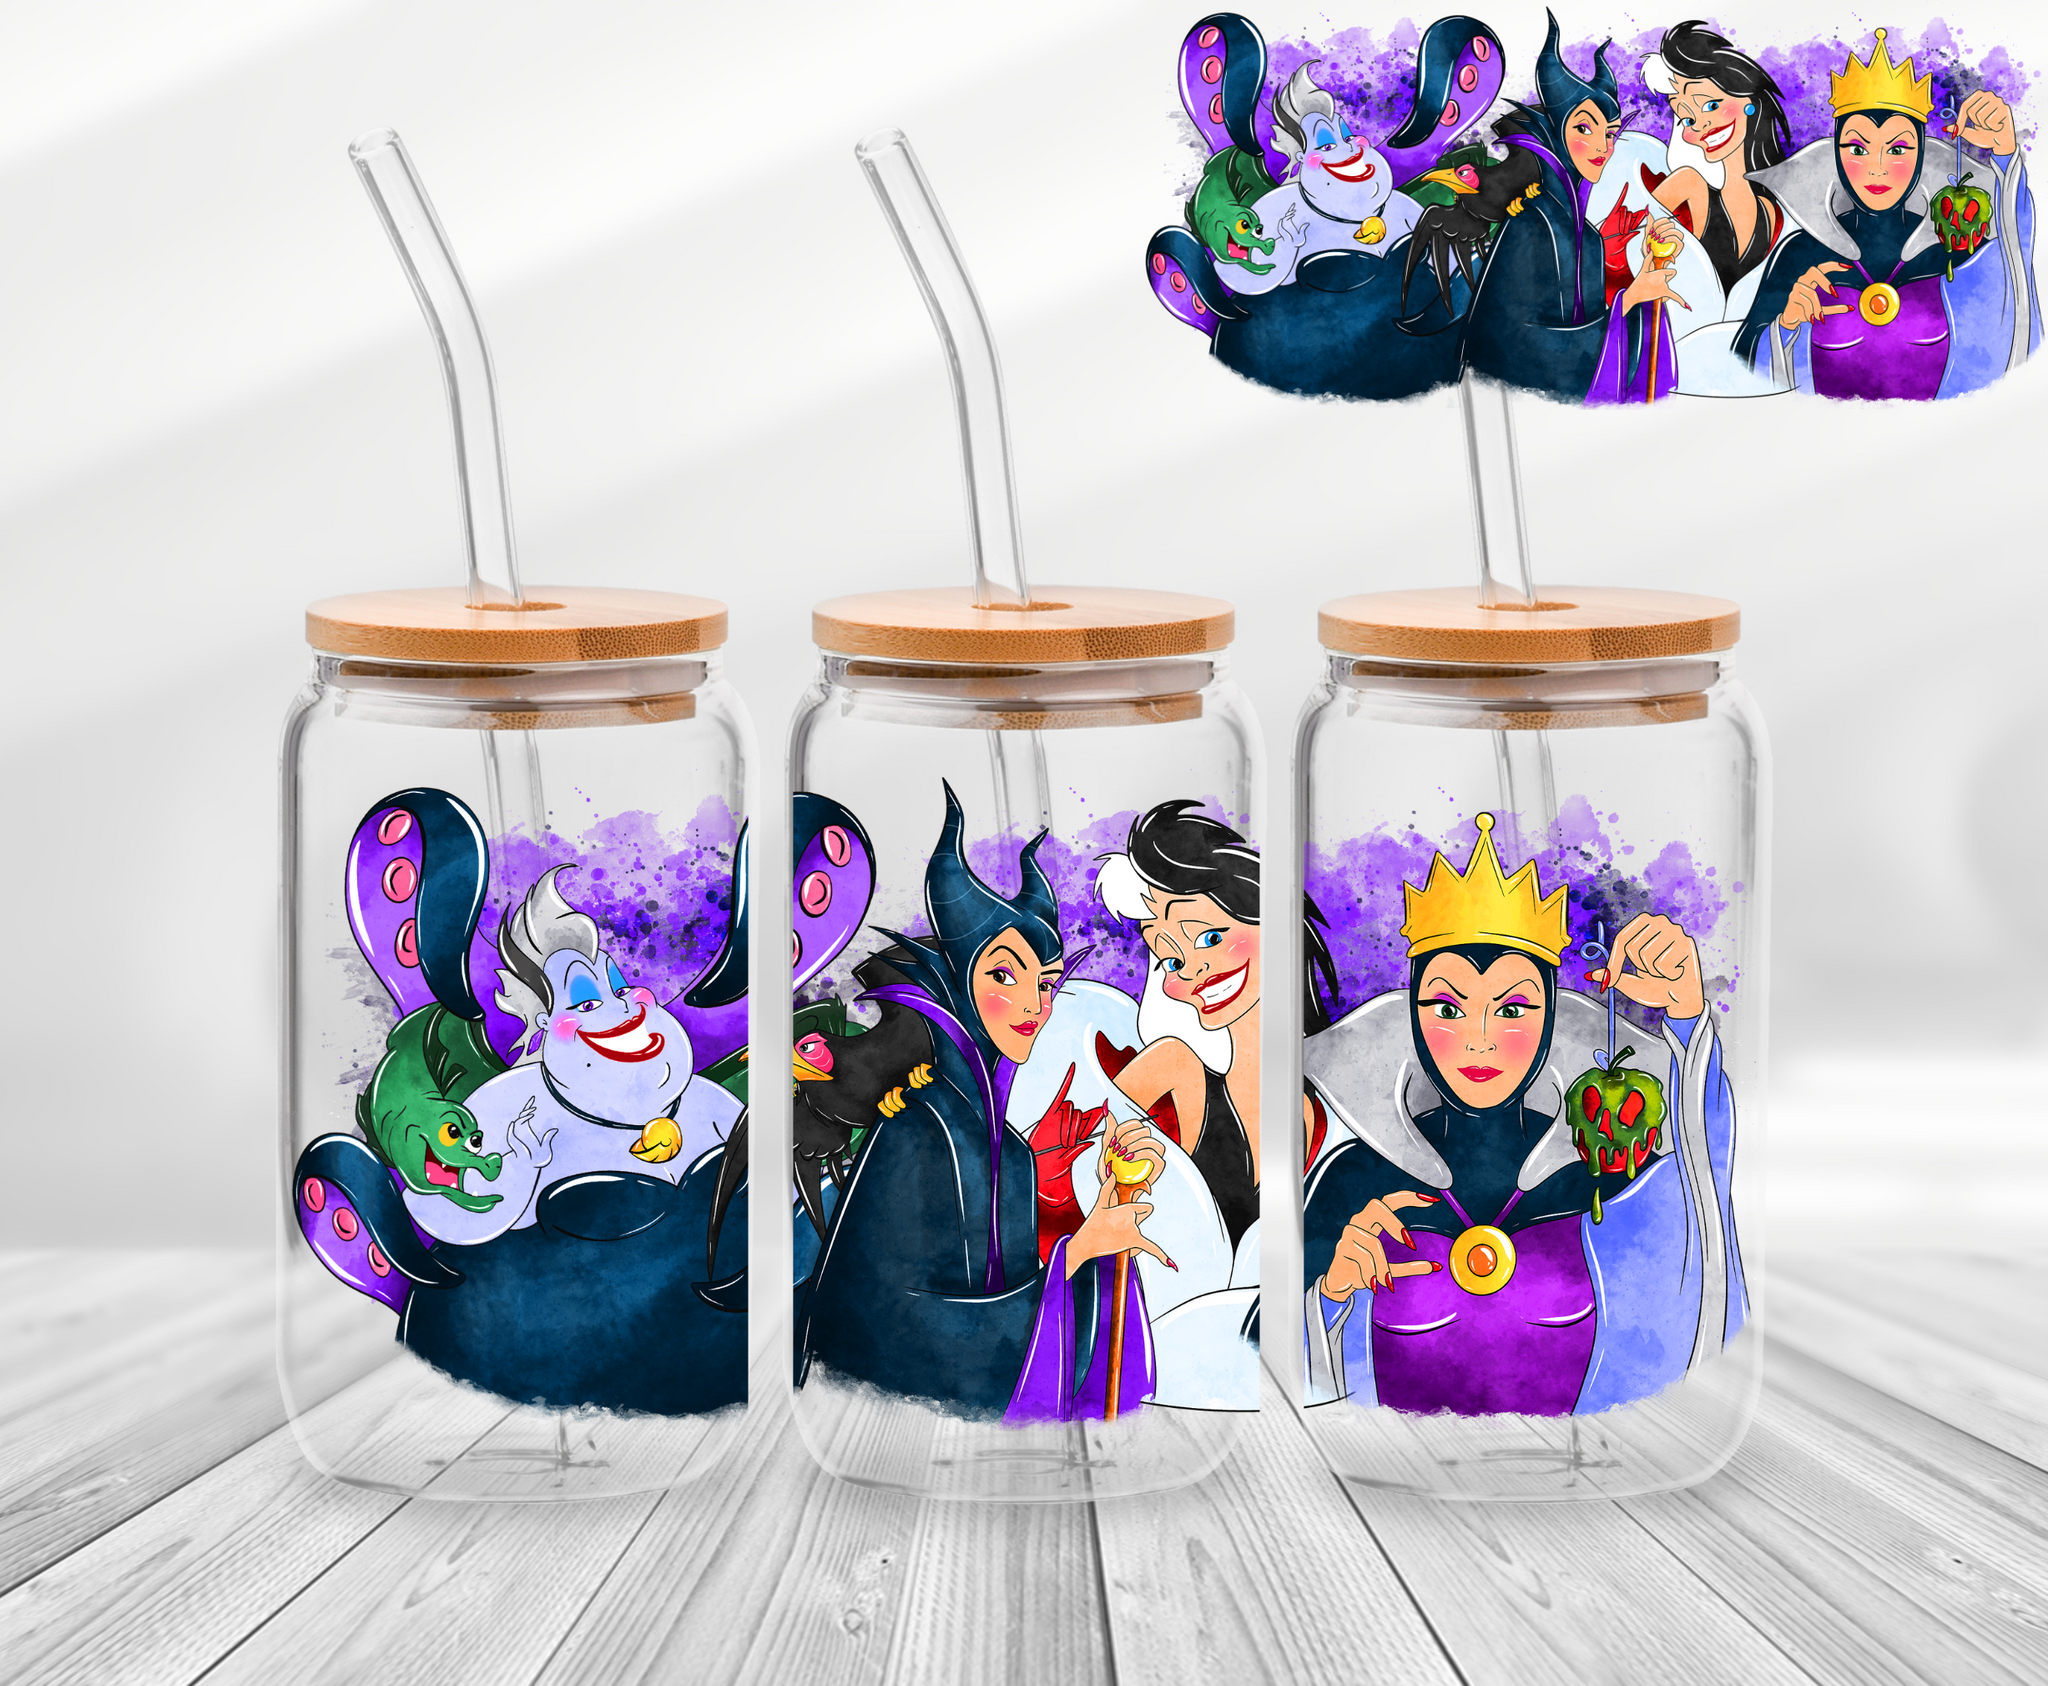 Villains 2 - 16oz UV DTF Cup Wraps – Lovely Luxuries xo